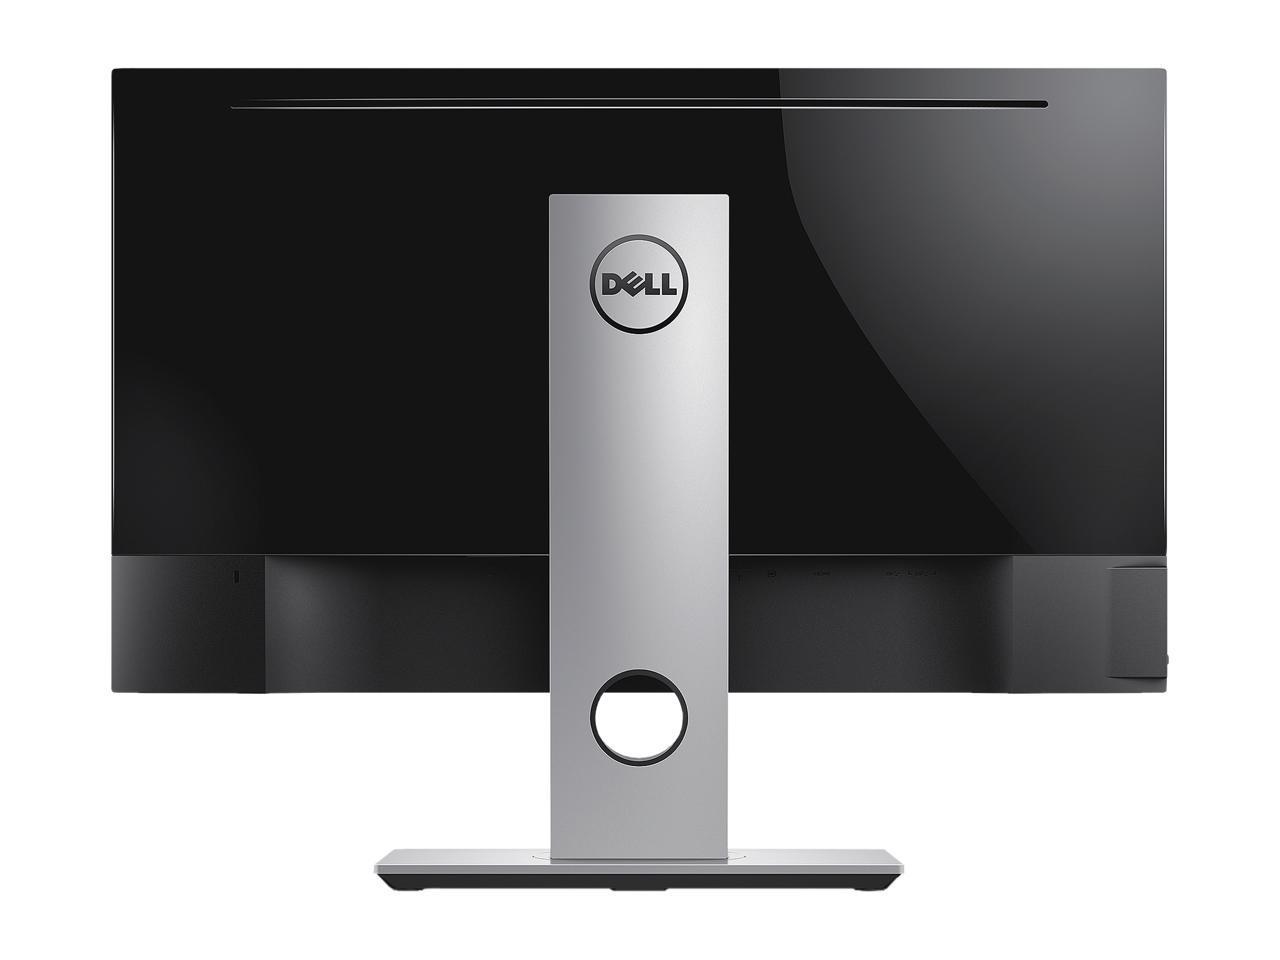 DELL S2716DG 27" Gaming Monitor with WQHD 2560 x 1440 Resolution 144 Hz